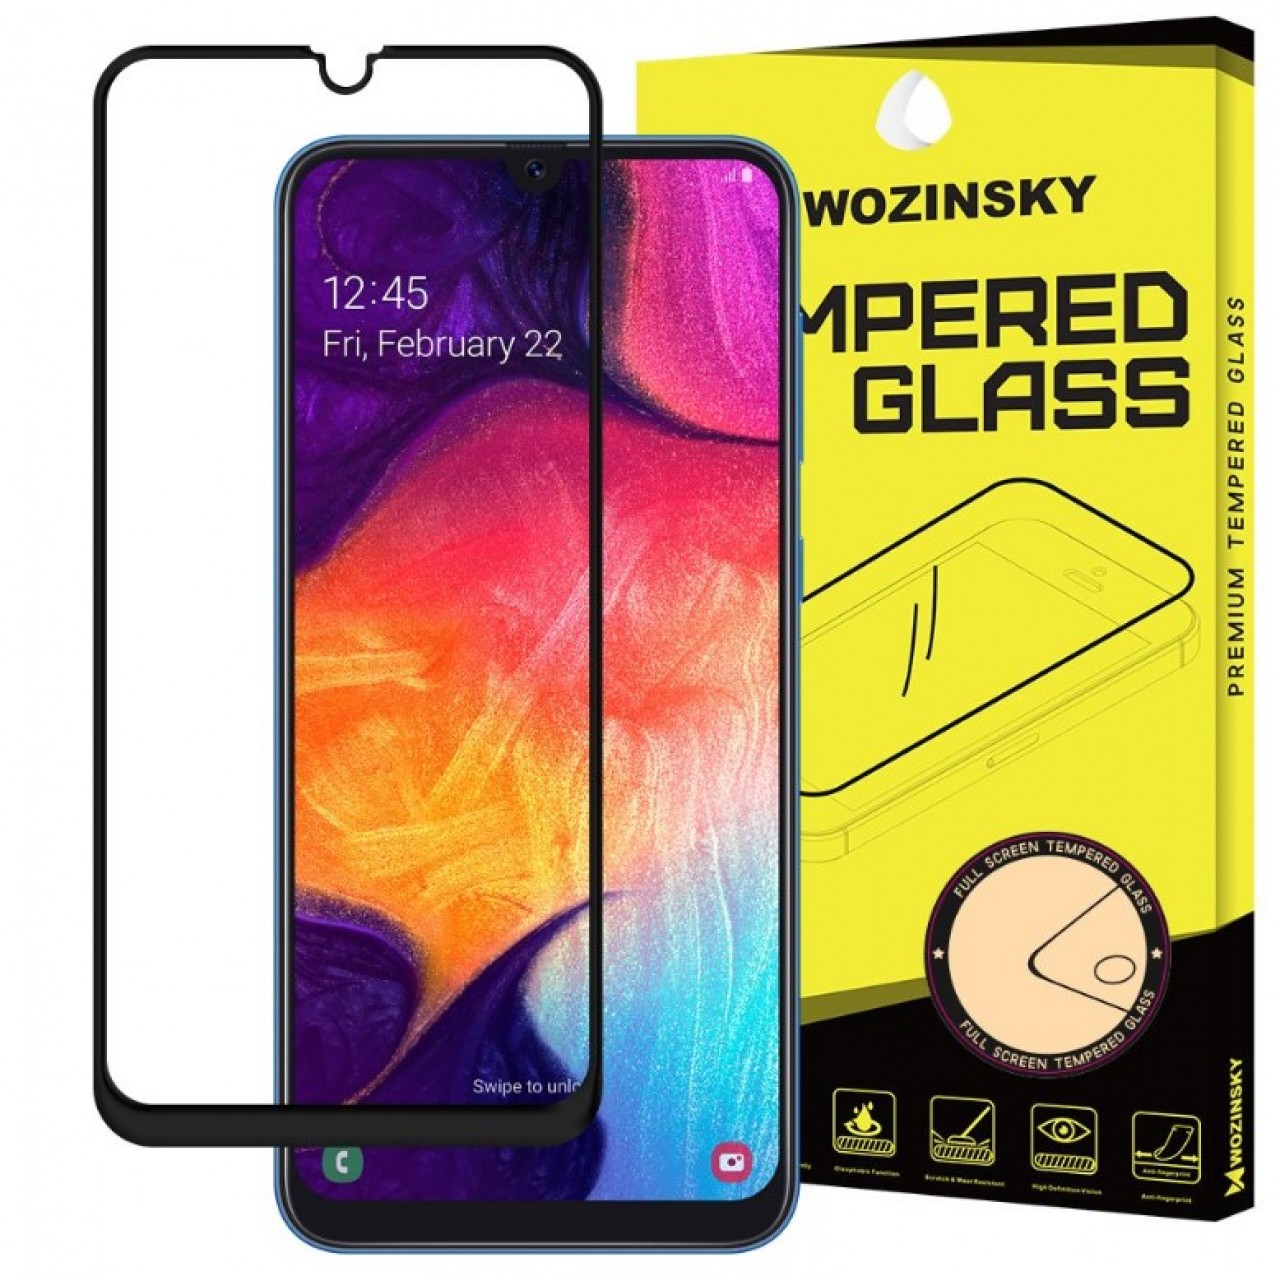 Tempered Glass (Τζάμι) - Προστασία Οθόνης 9H Samsung Galaxy A50 / A30 / A30S Full Glue Super Tough Screen Protector Full Coveraged with Frame Case Friendly - 4928 - Μαύρο - Wozinsky